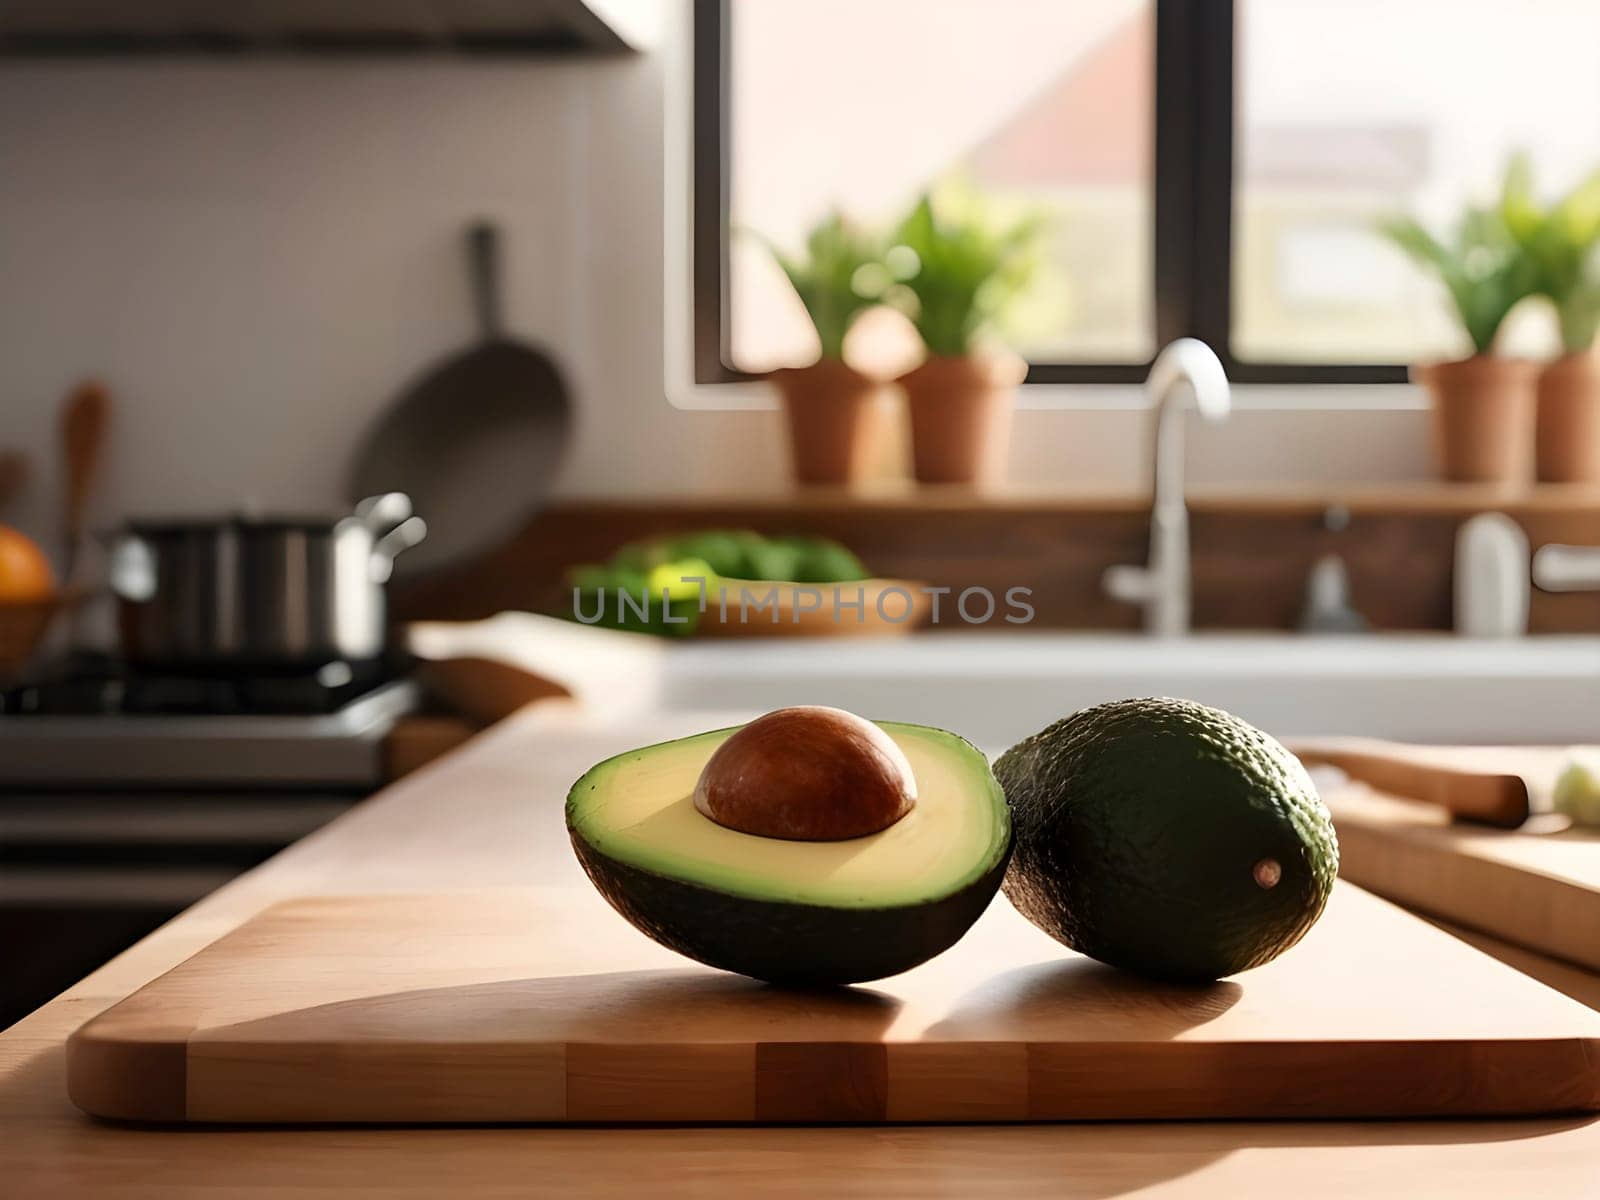 Kitchen Elegance: Avocado Perfection with Soft Afternoon Glow by mailos